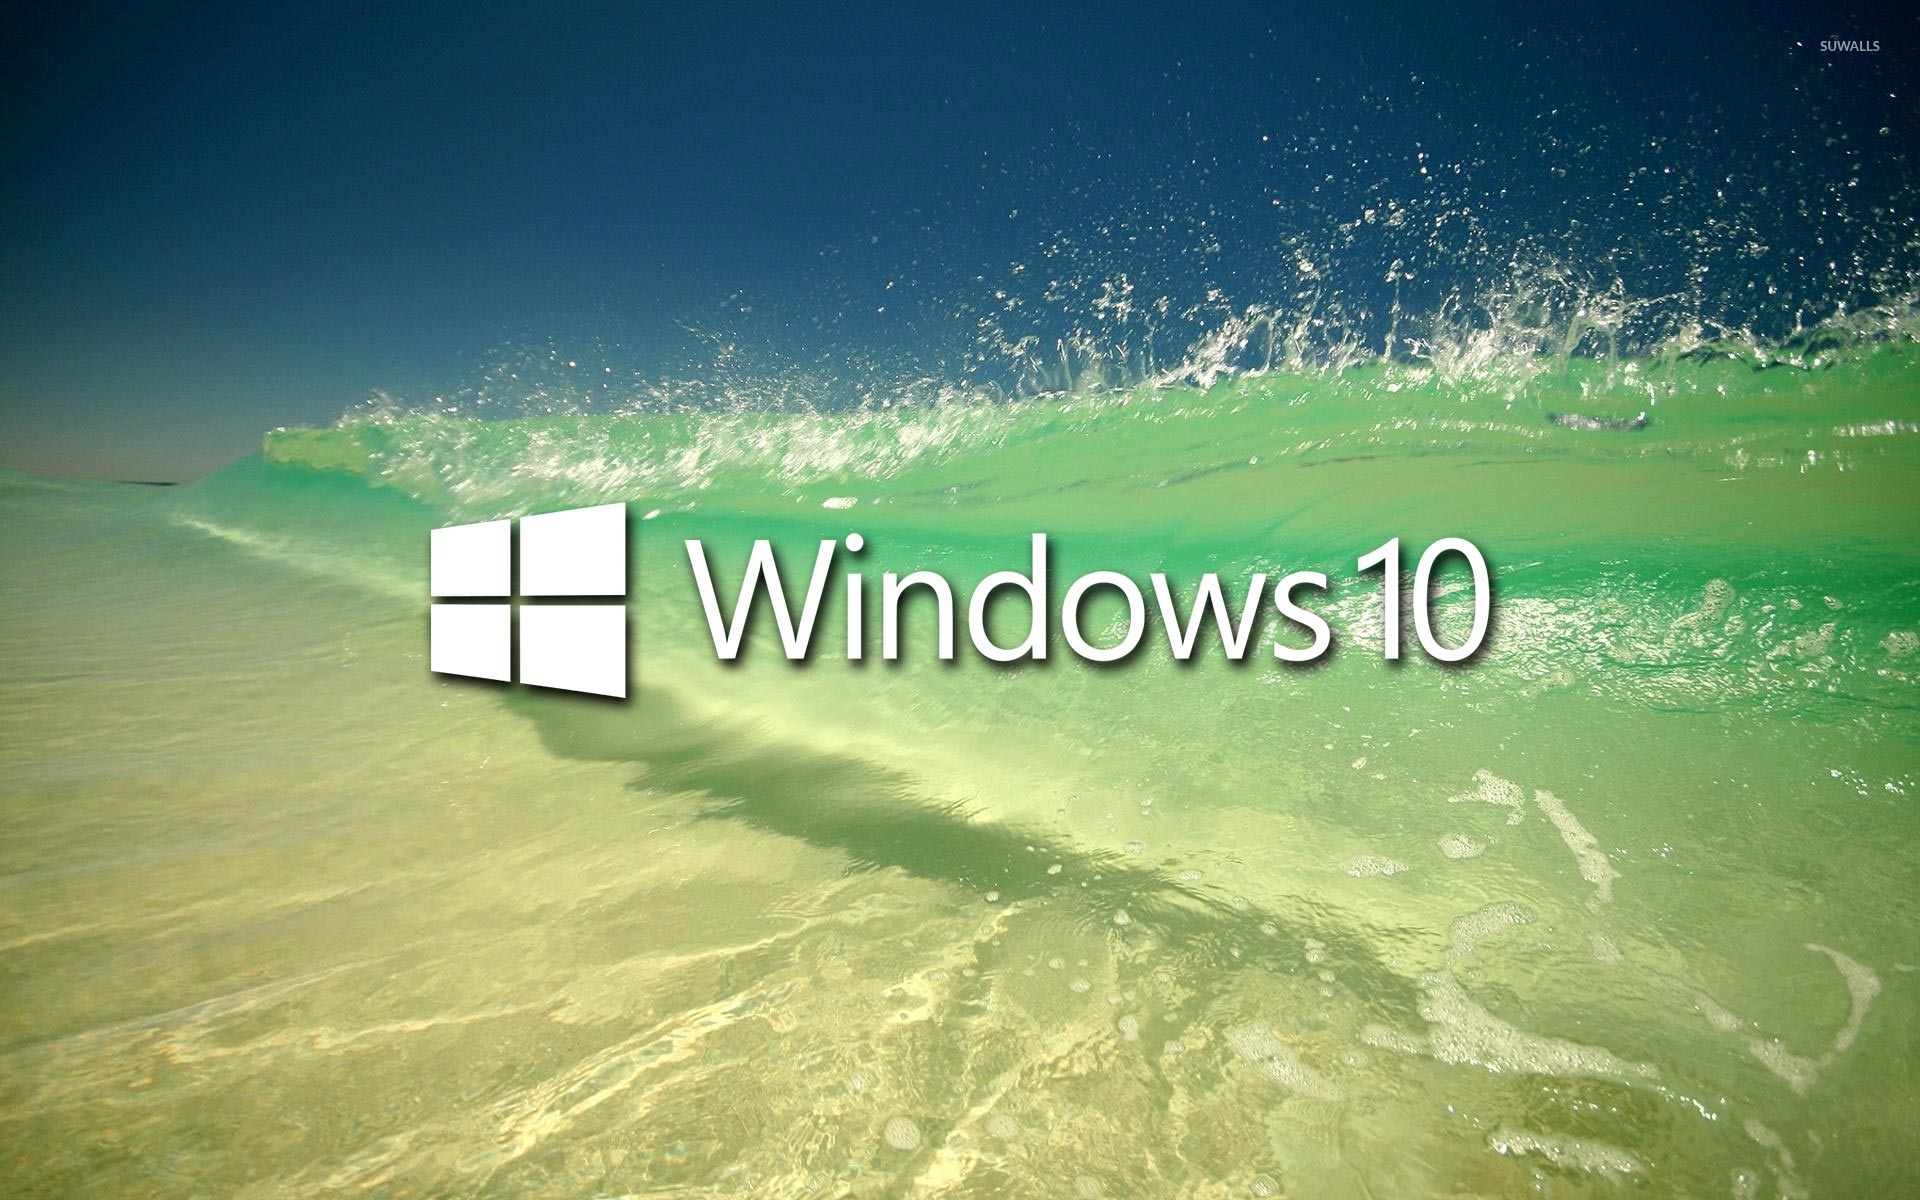 Windows 10 On A Clear Wave Text Logo Wallpaper Computer